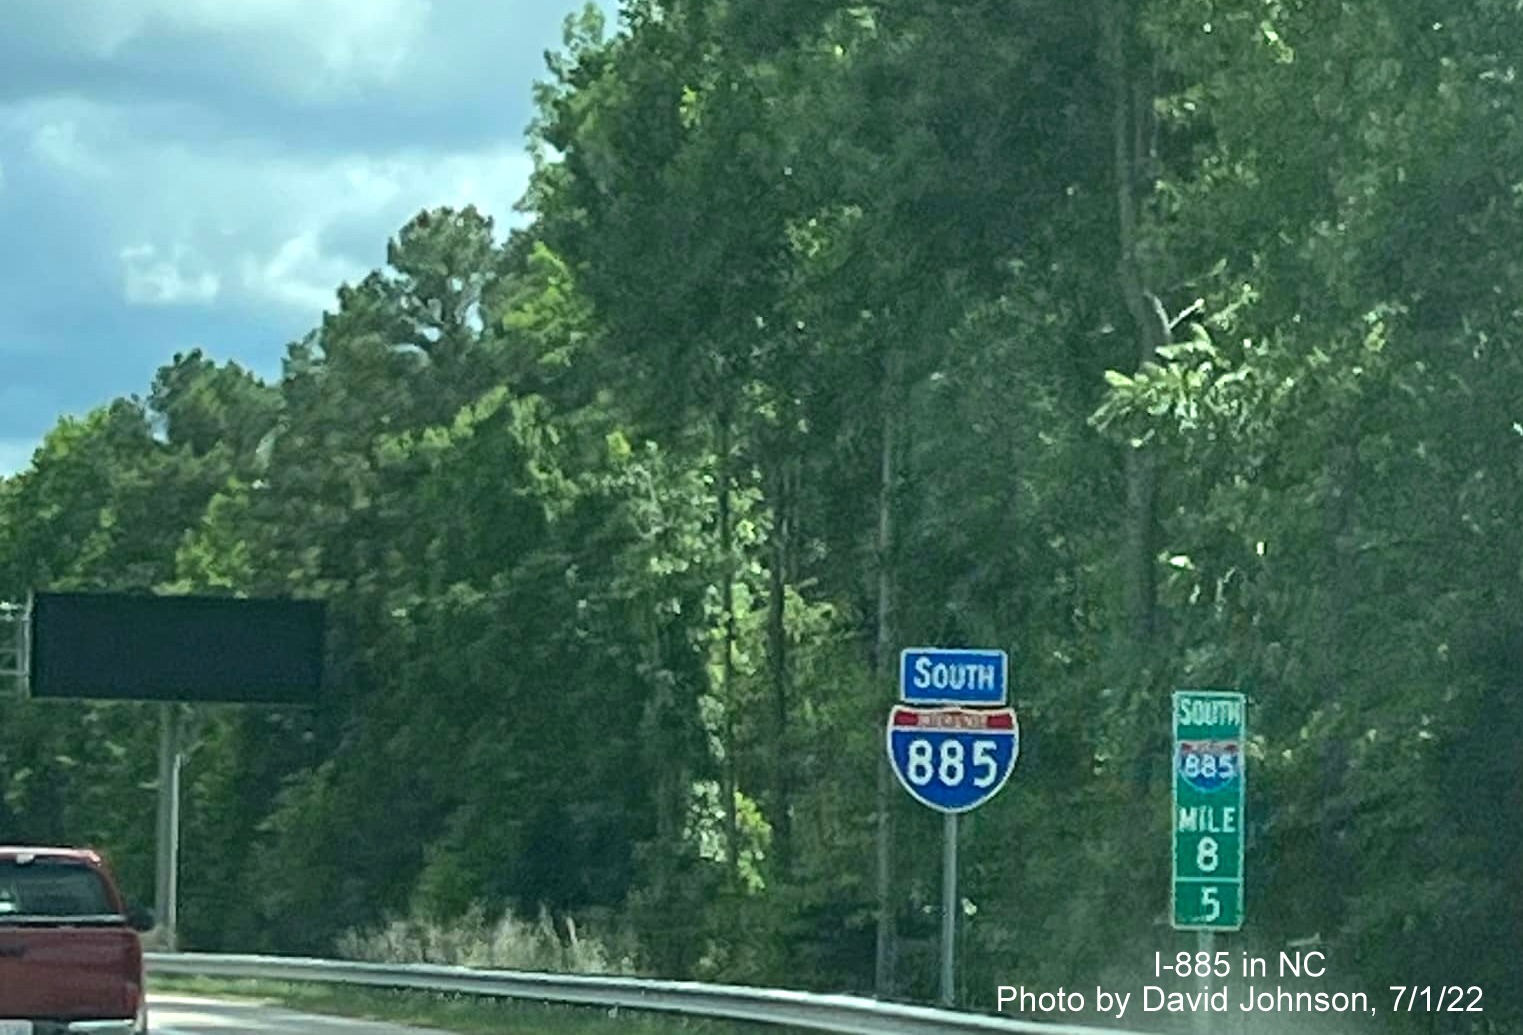 Image of South I-885 reassurance marker and new 8.5 mile marker in Durham, by David Johnson July 2022